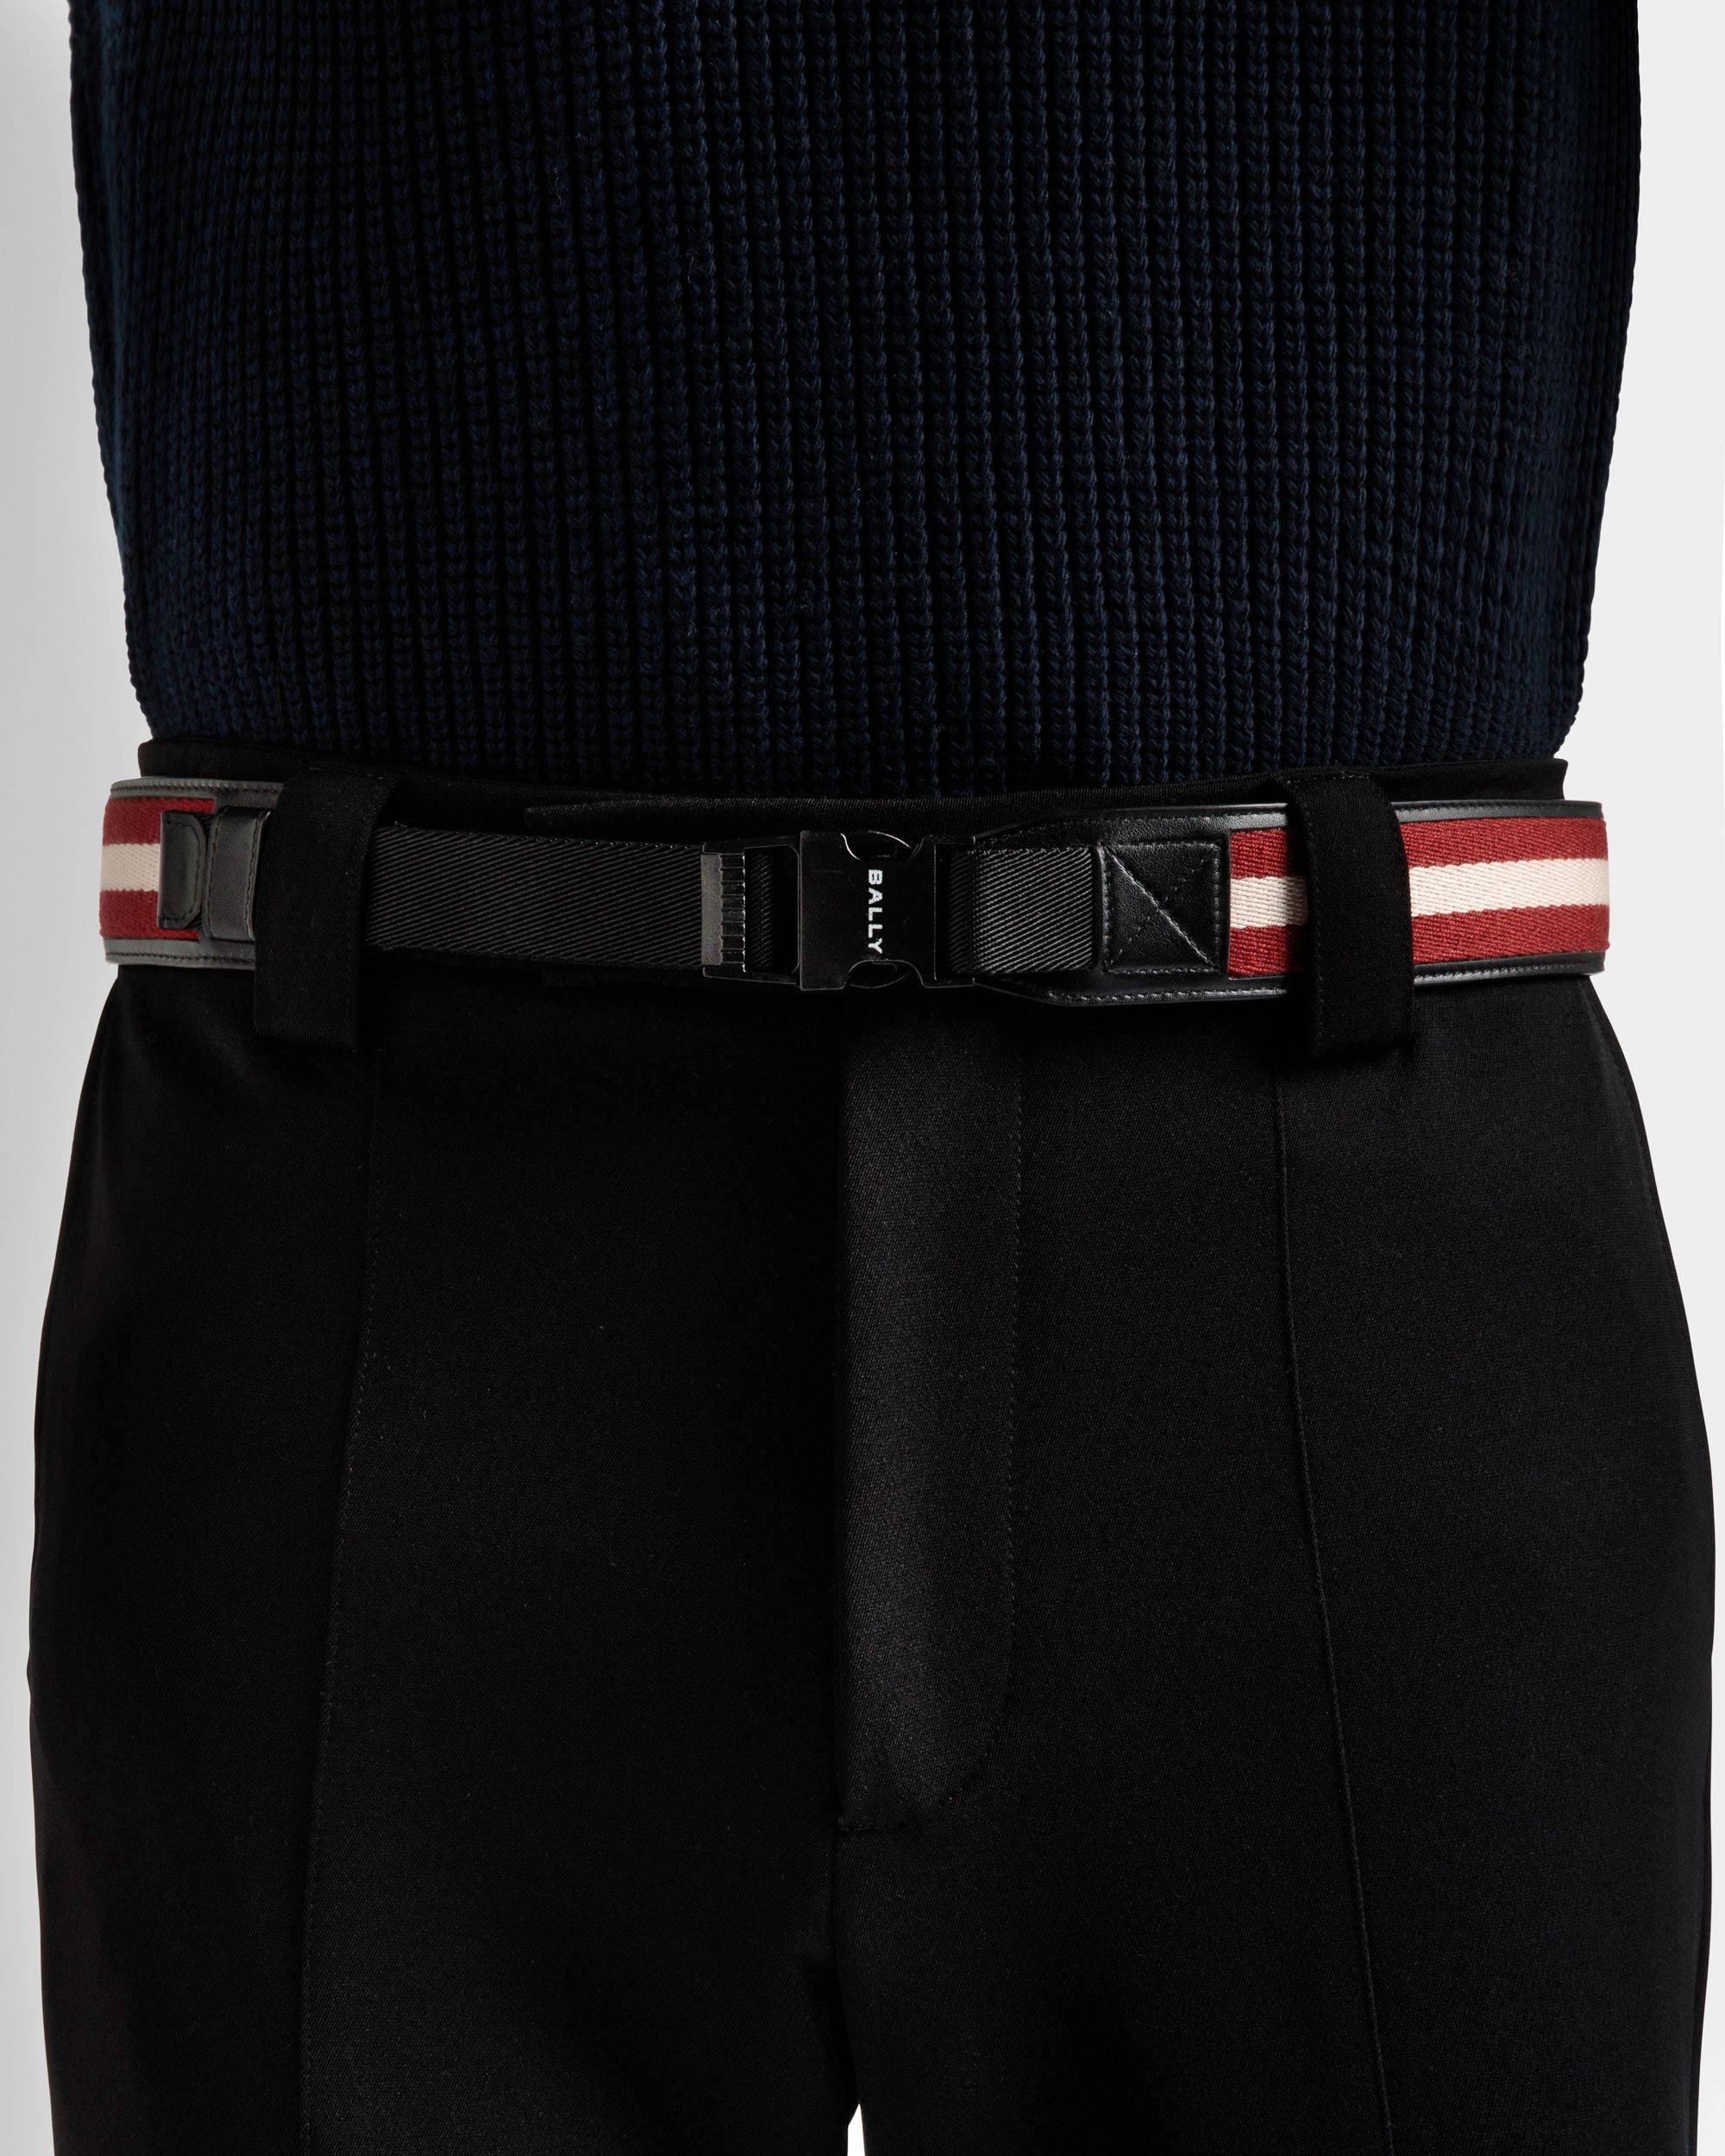 Tobyn 40mm | Men's Belt in Red, White and Black Fabric and Leather | Bally | On Model Front